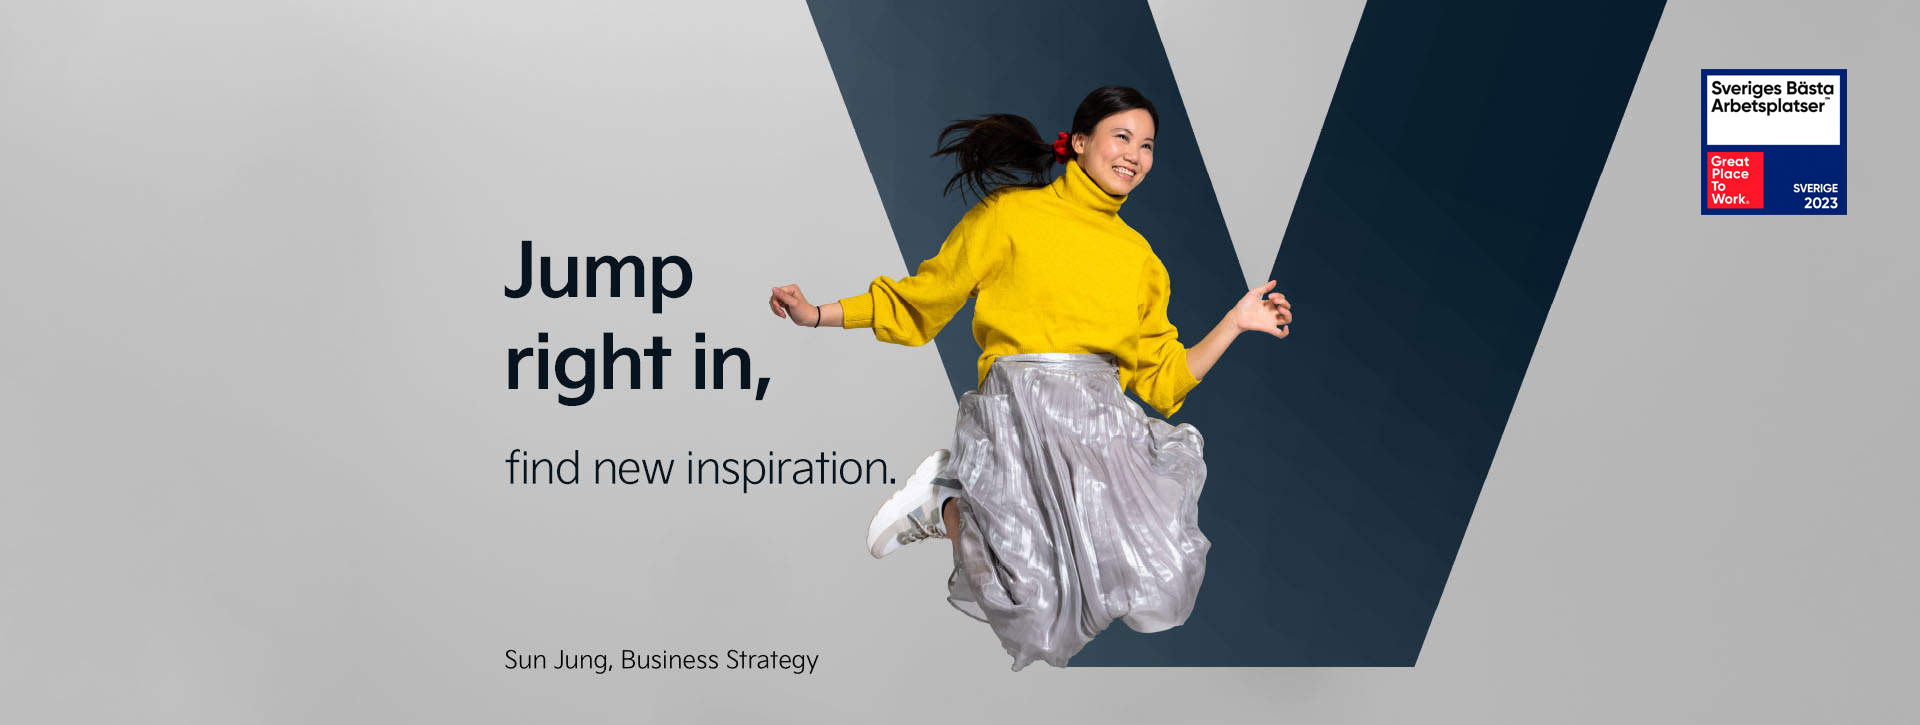 Sun from our Business Strategy department is jumping and smiling in front of the letter "V". Next to her we find our statement: "Jump right in - find new inspiration".